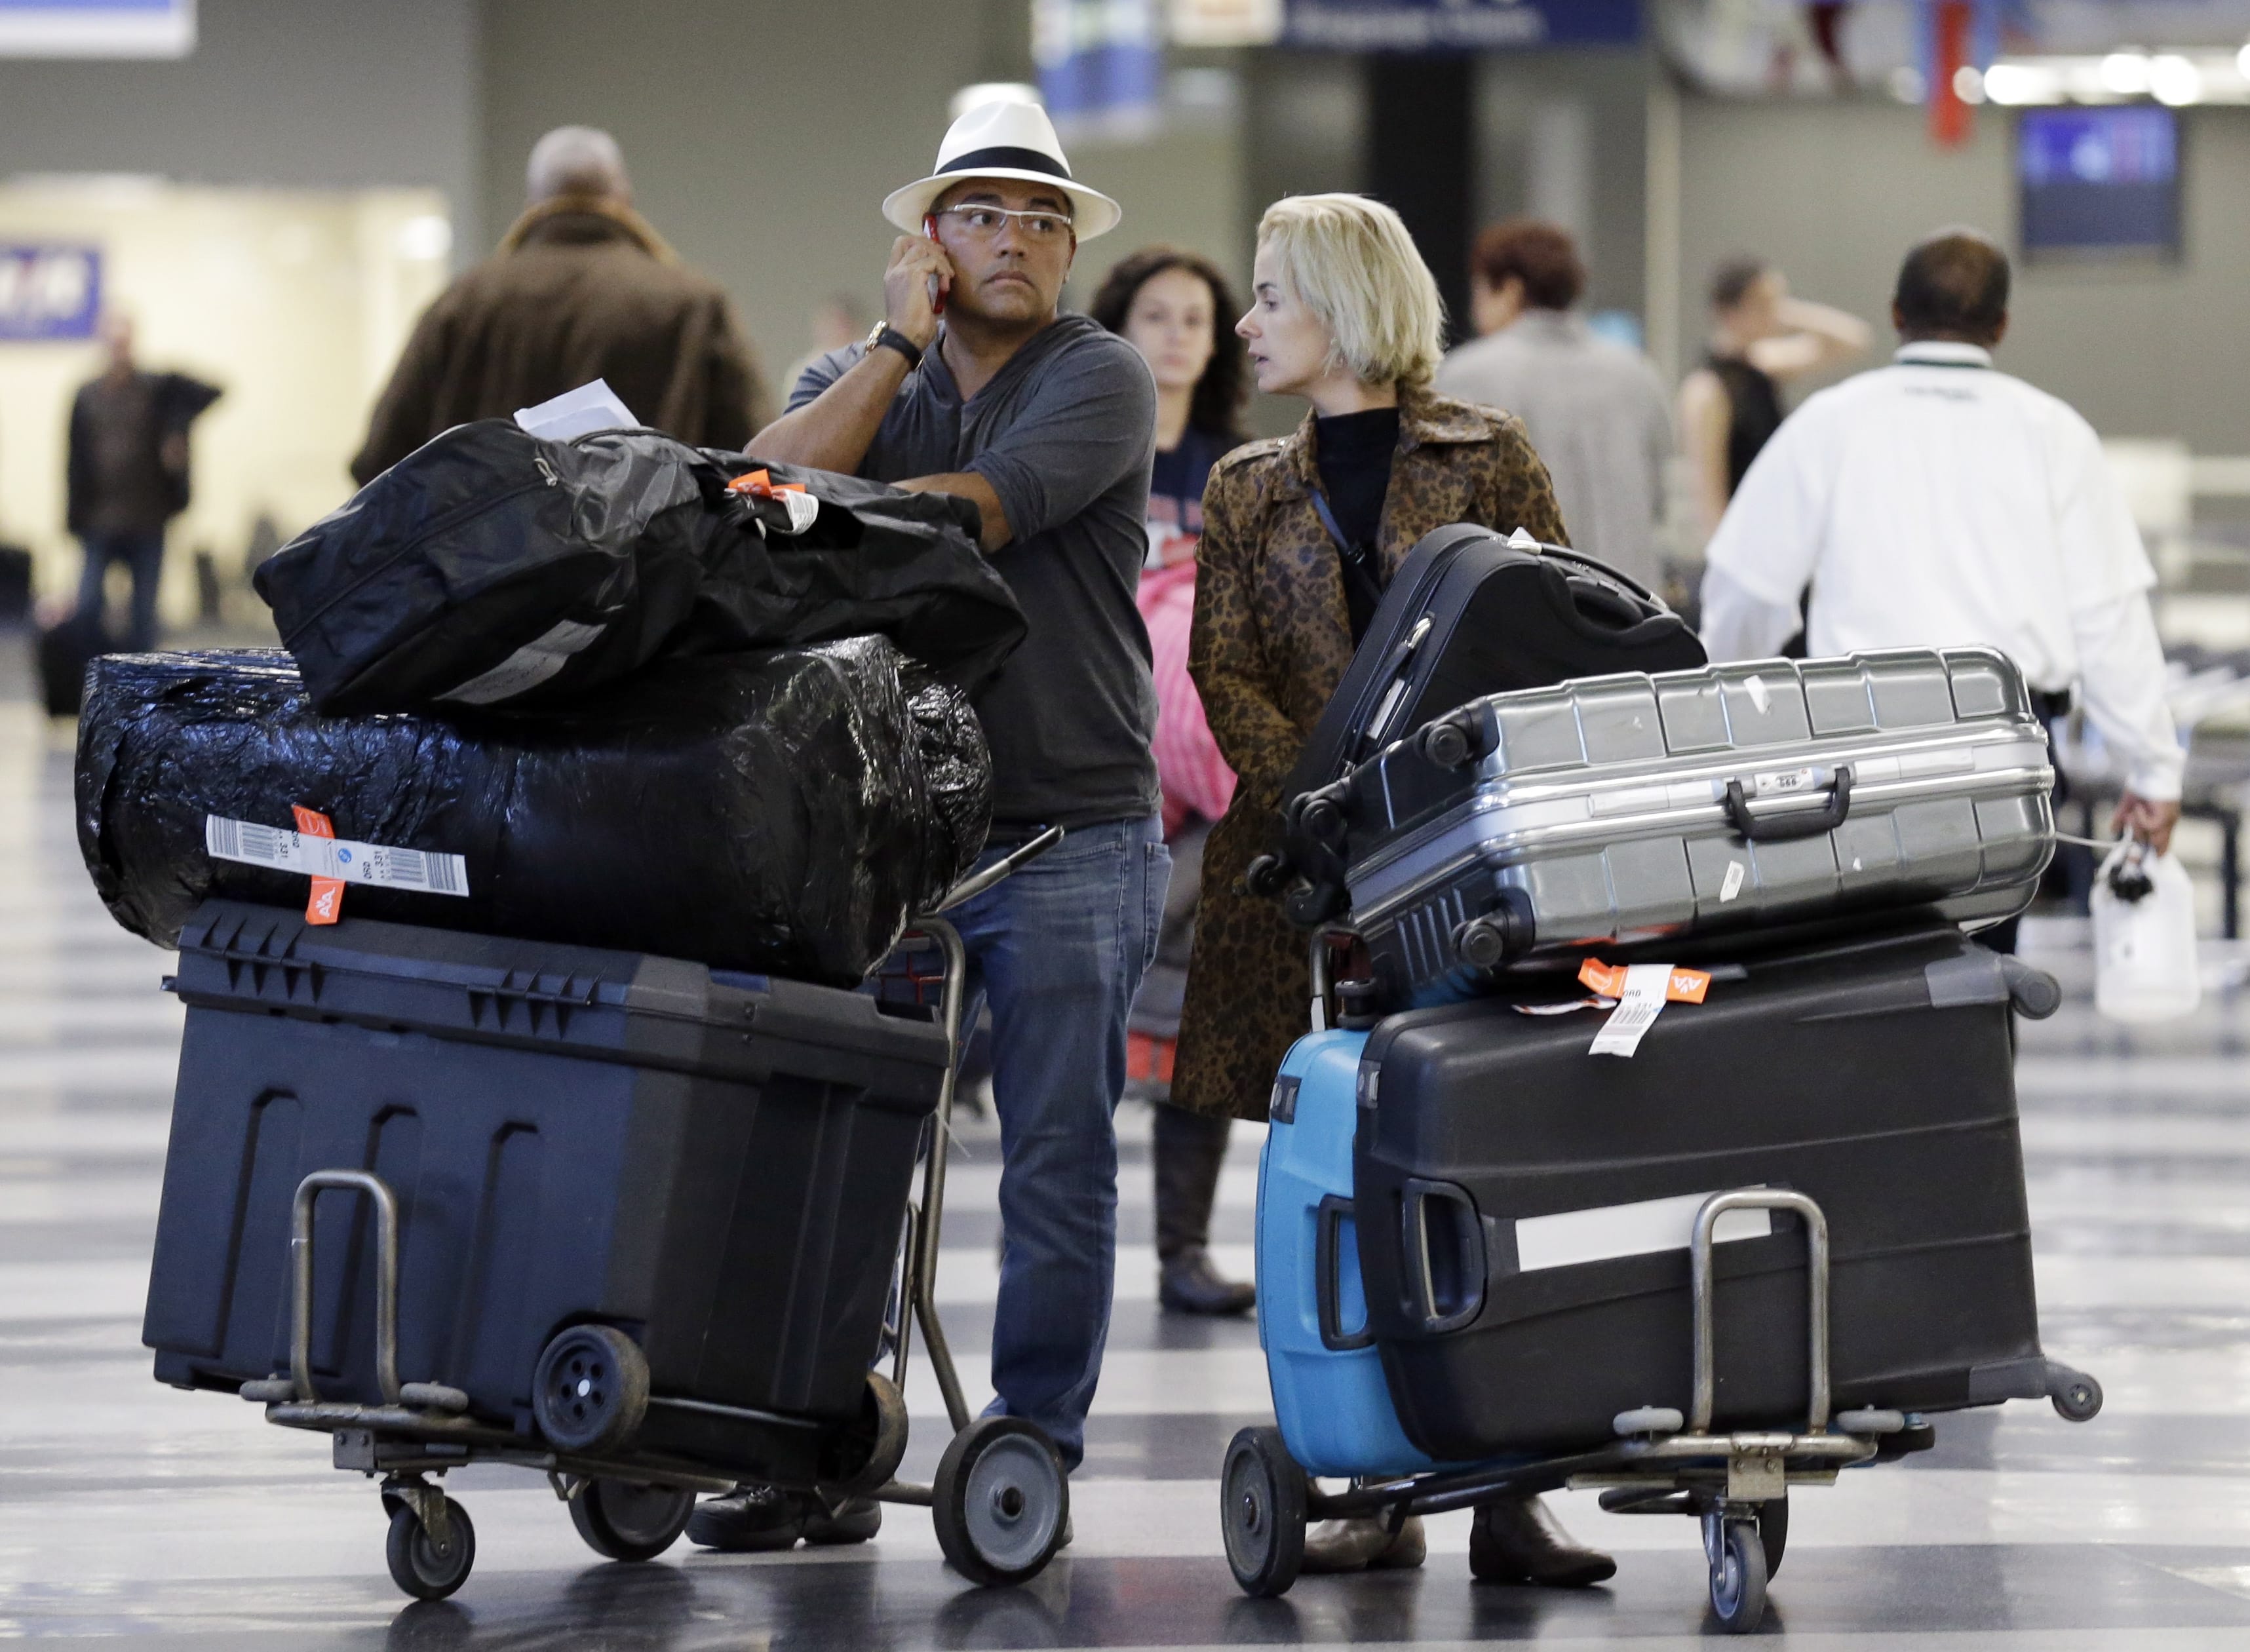 Travelers walk through the terminal 3 baggage claim at O'Hare International airport in Chicago in 2013.